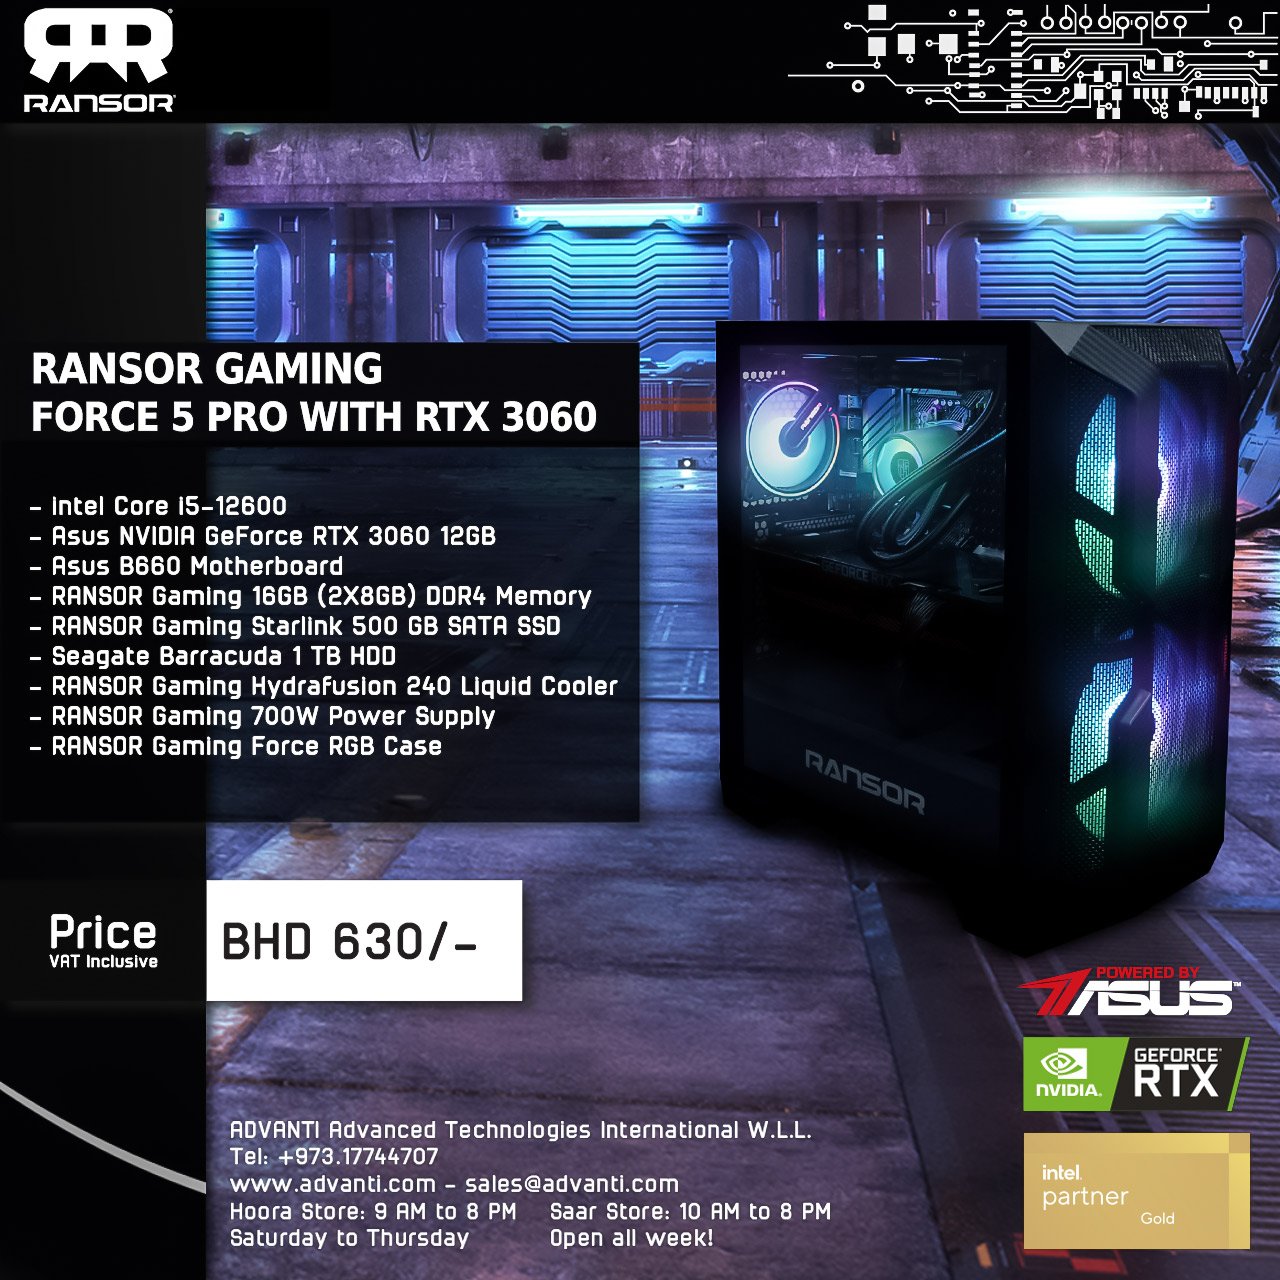 ransor-gaming-force-5-pro-with-rtx-3060-